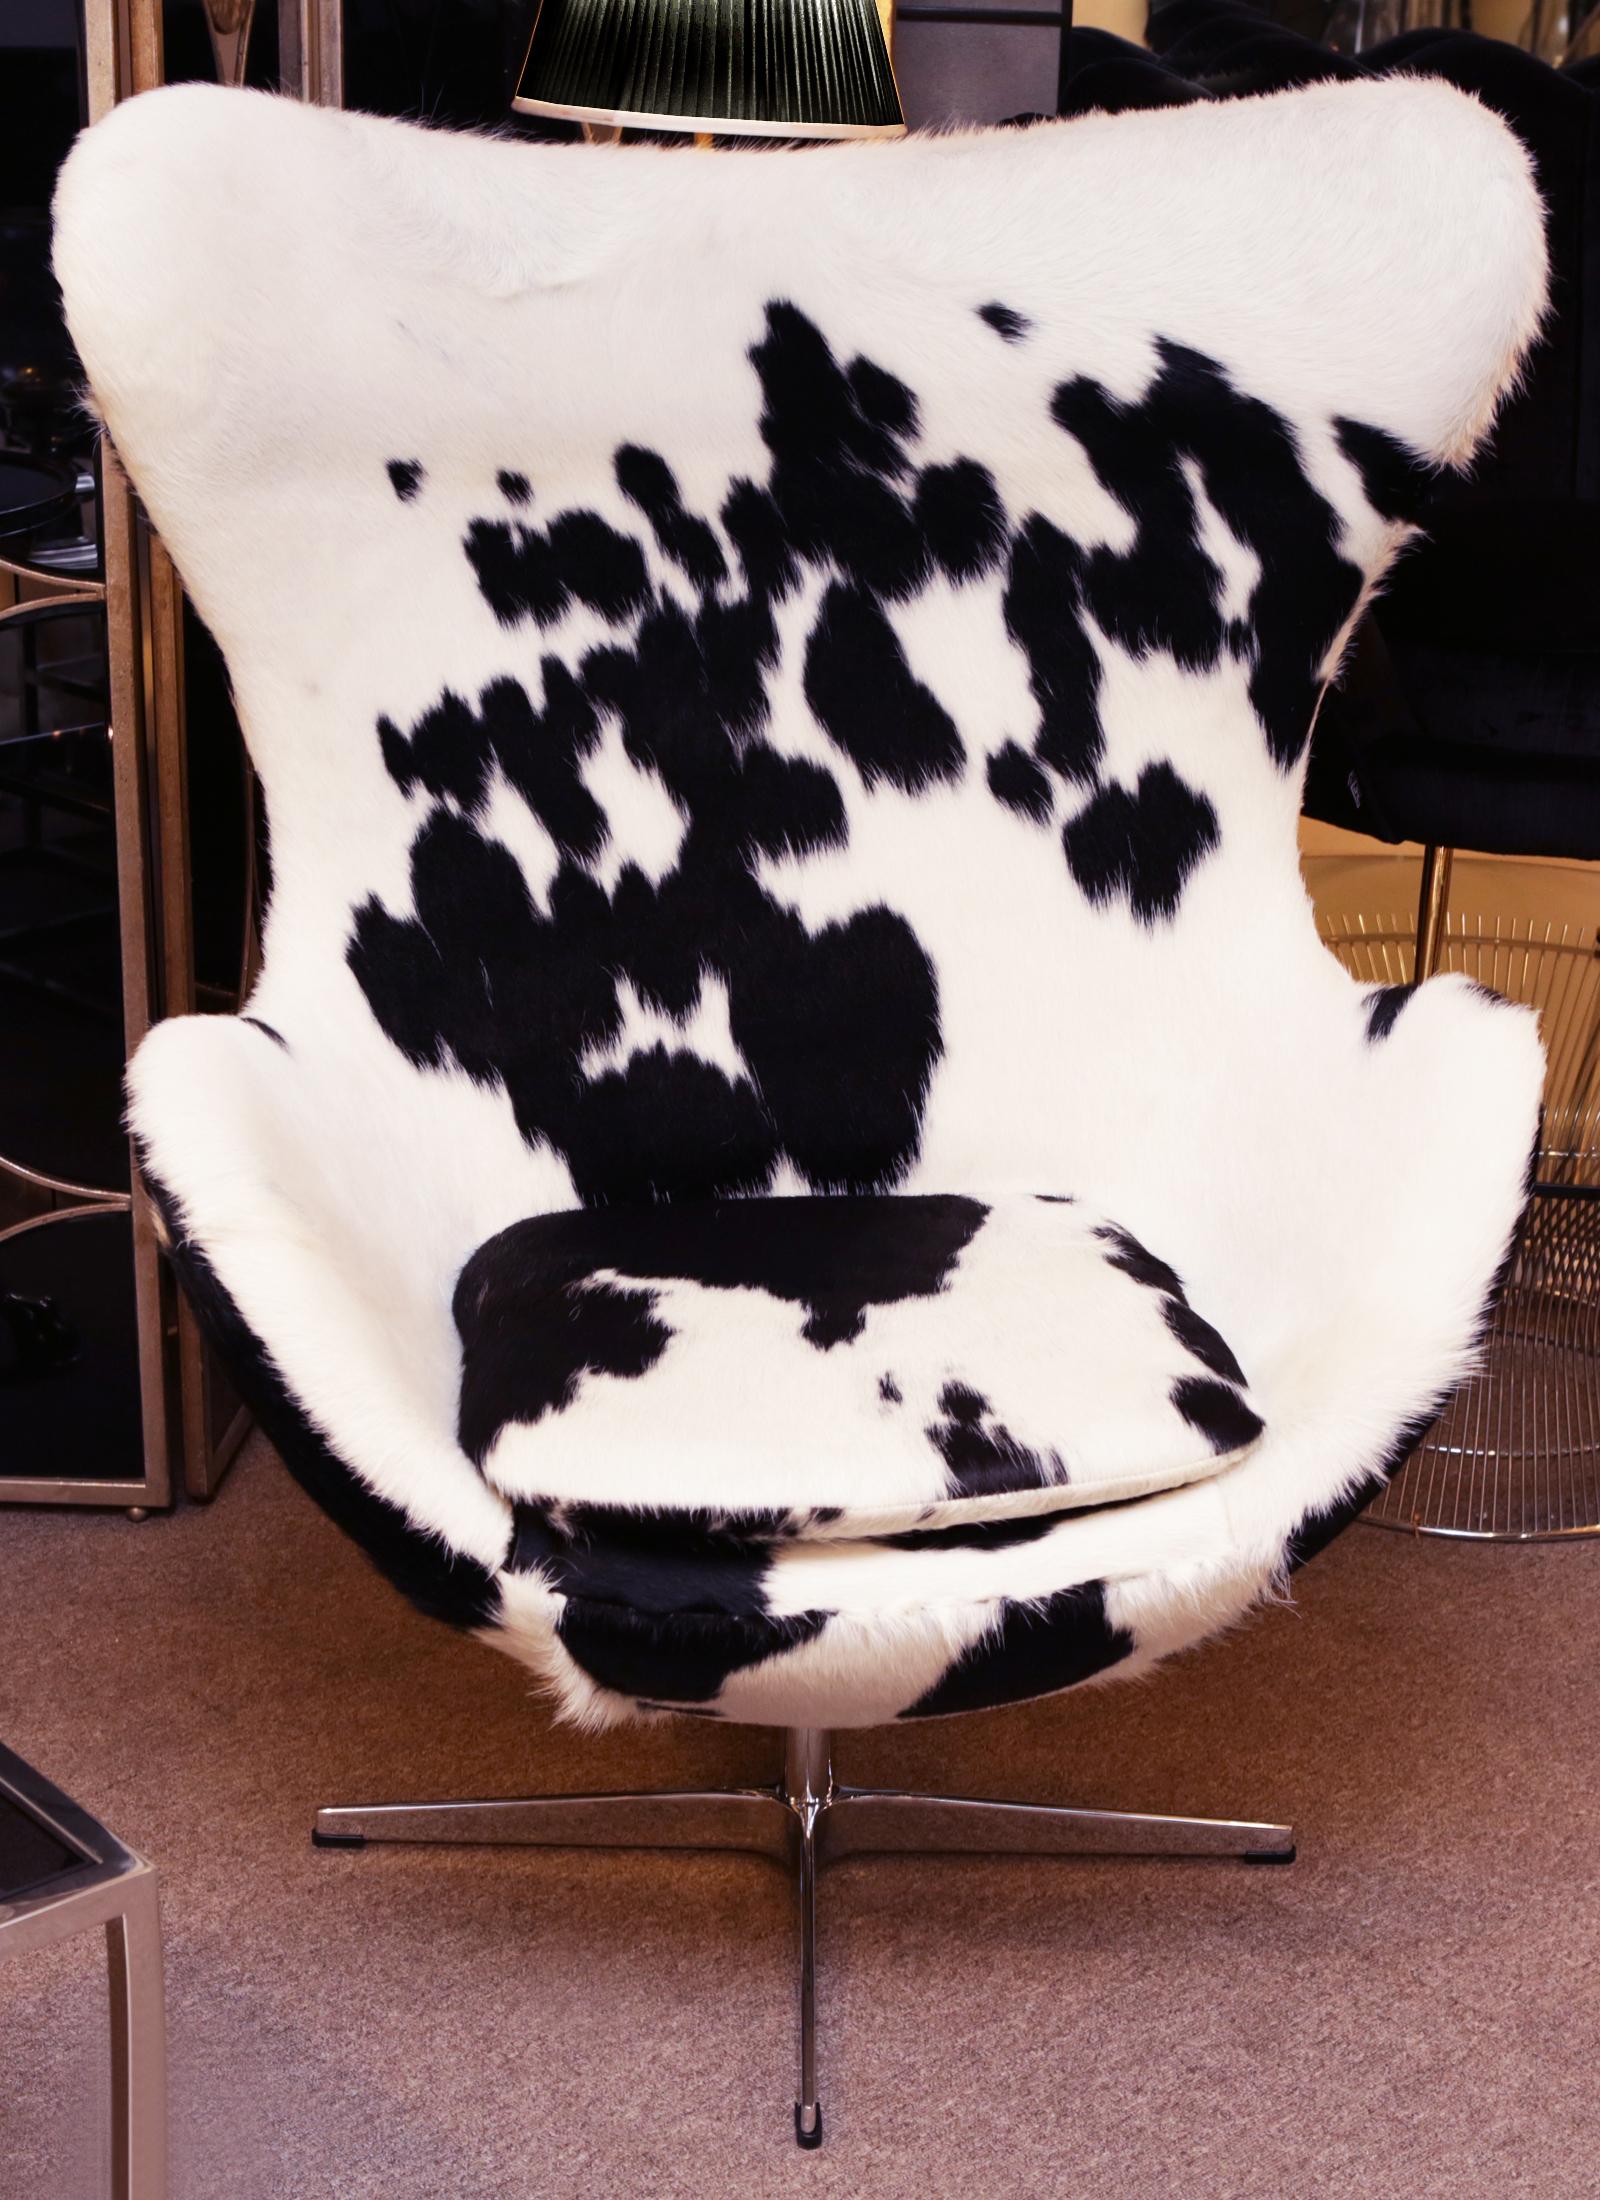 Armchair pony black and white egg,
covered with treated natural pony,
on swivel polished stainless steel feet.
Exceptional piece.